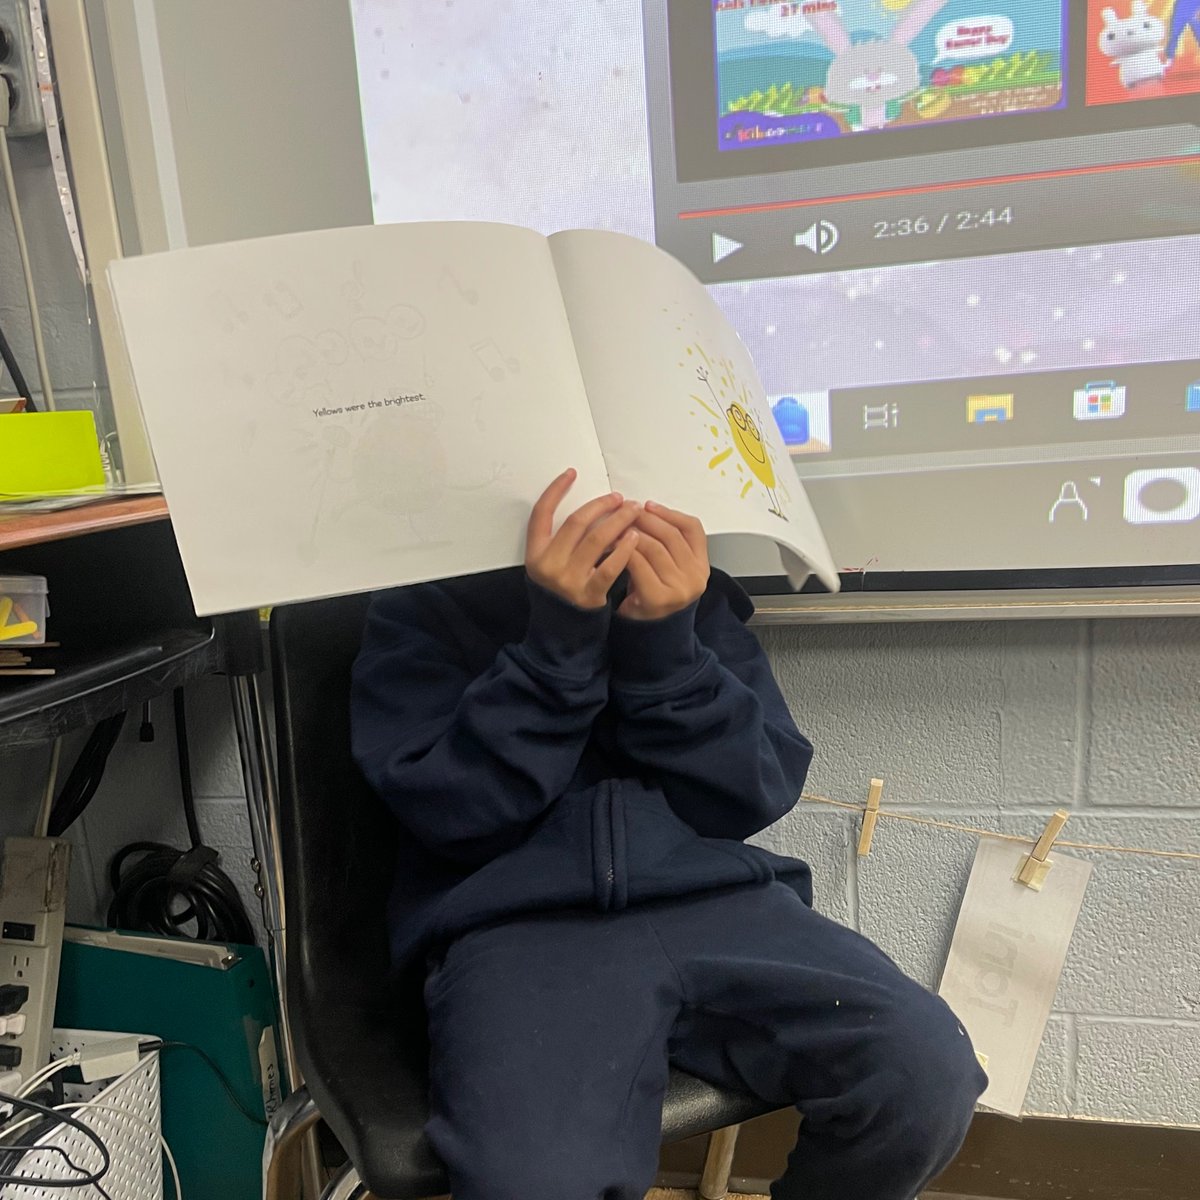 Today a student asked Mrs. Silva if he could be the teacher. He put on a song and changed the lesson plan to include a story! #littlereaders @HWCDSB @crisanten1 @DeanDiFrancesco